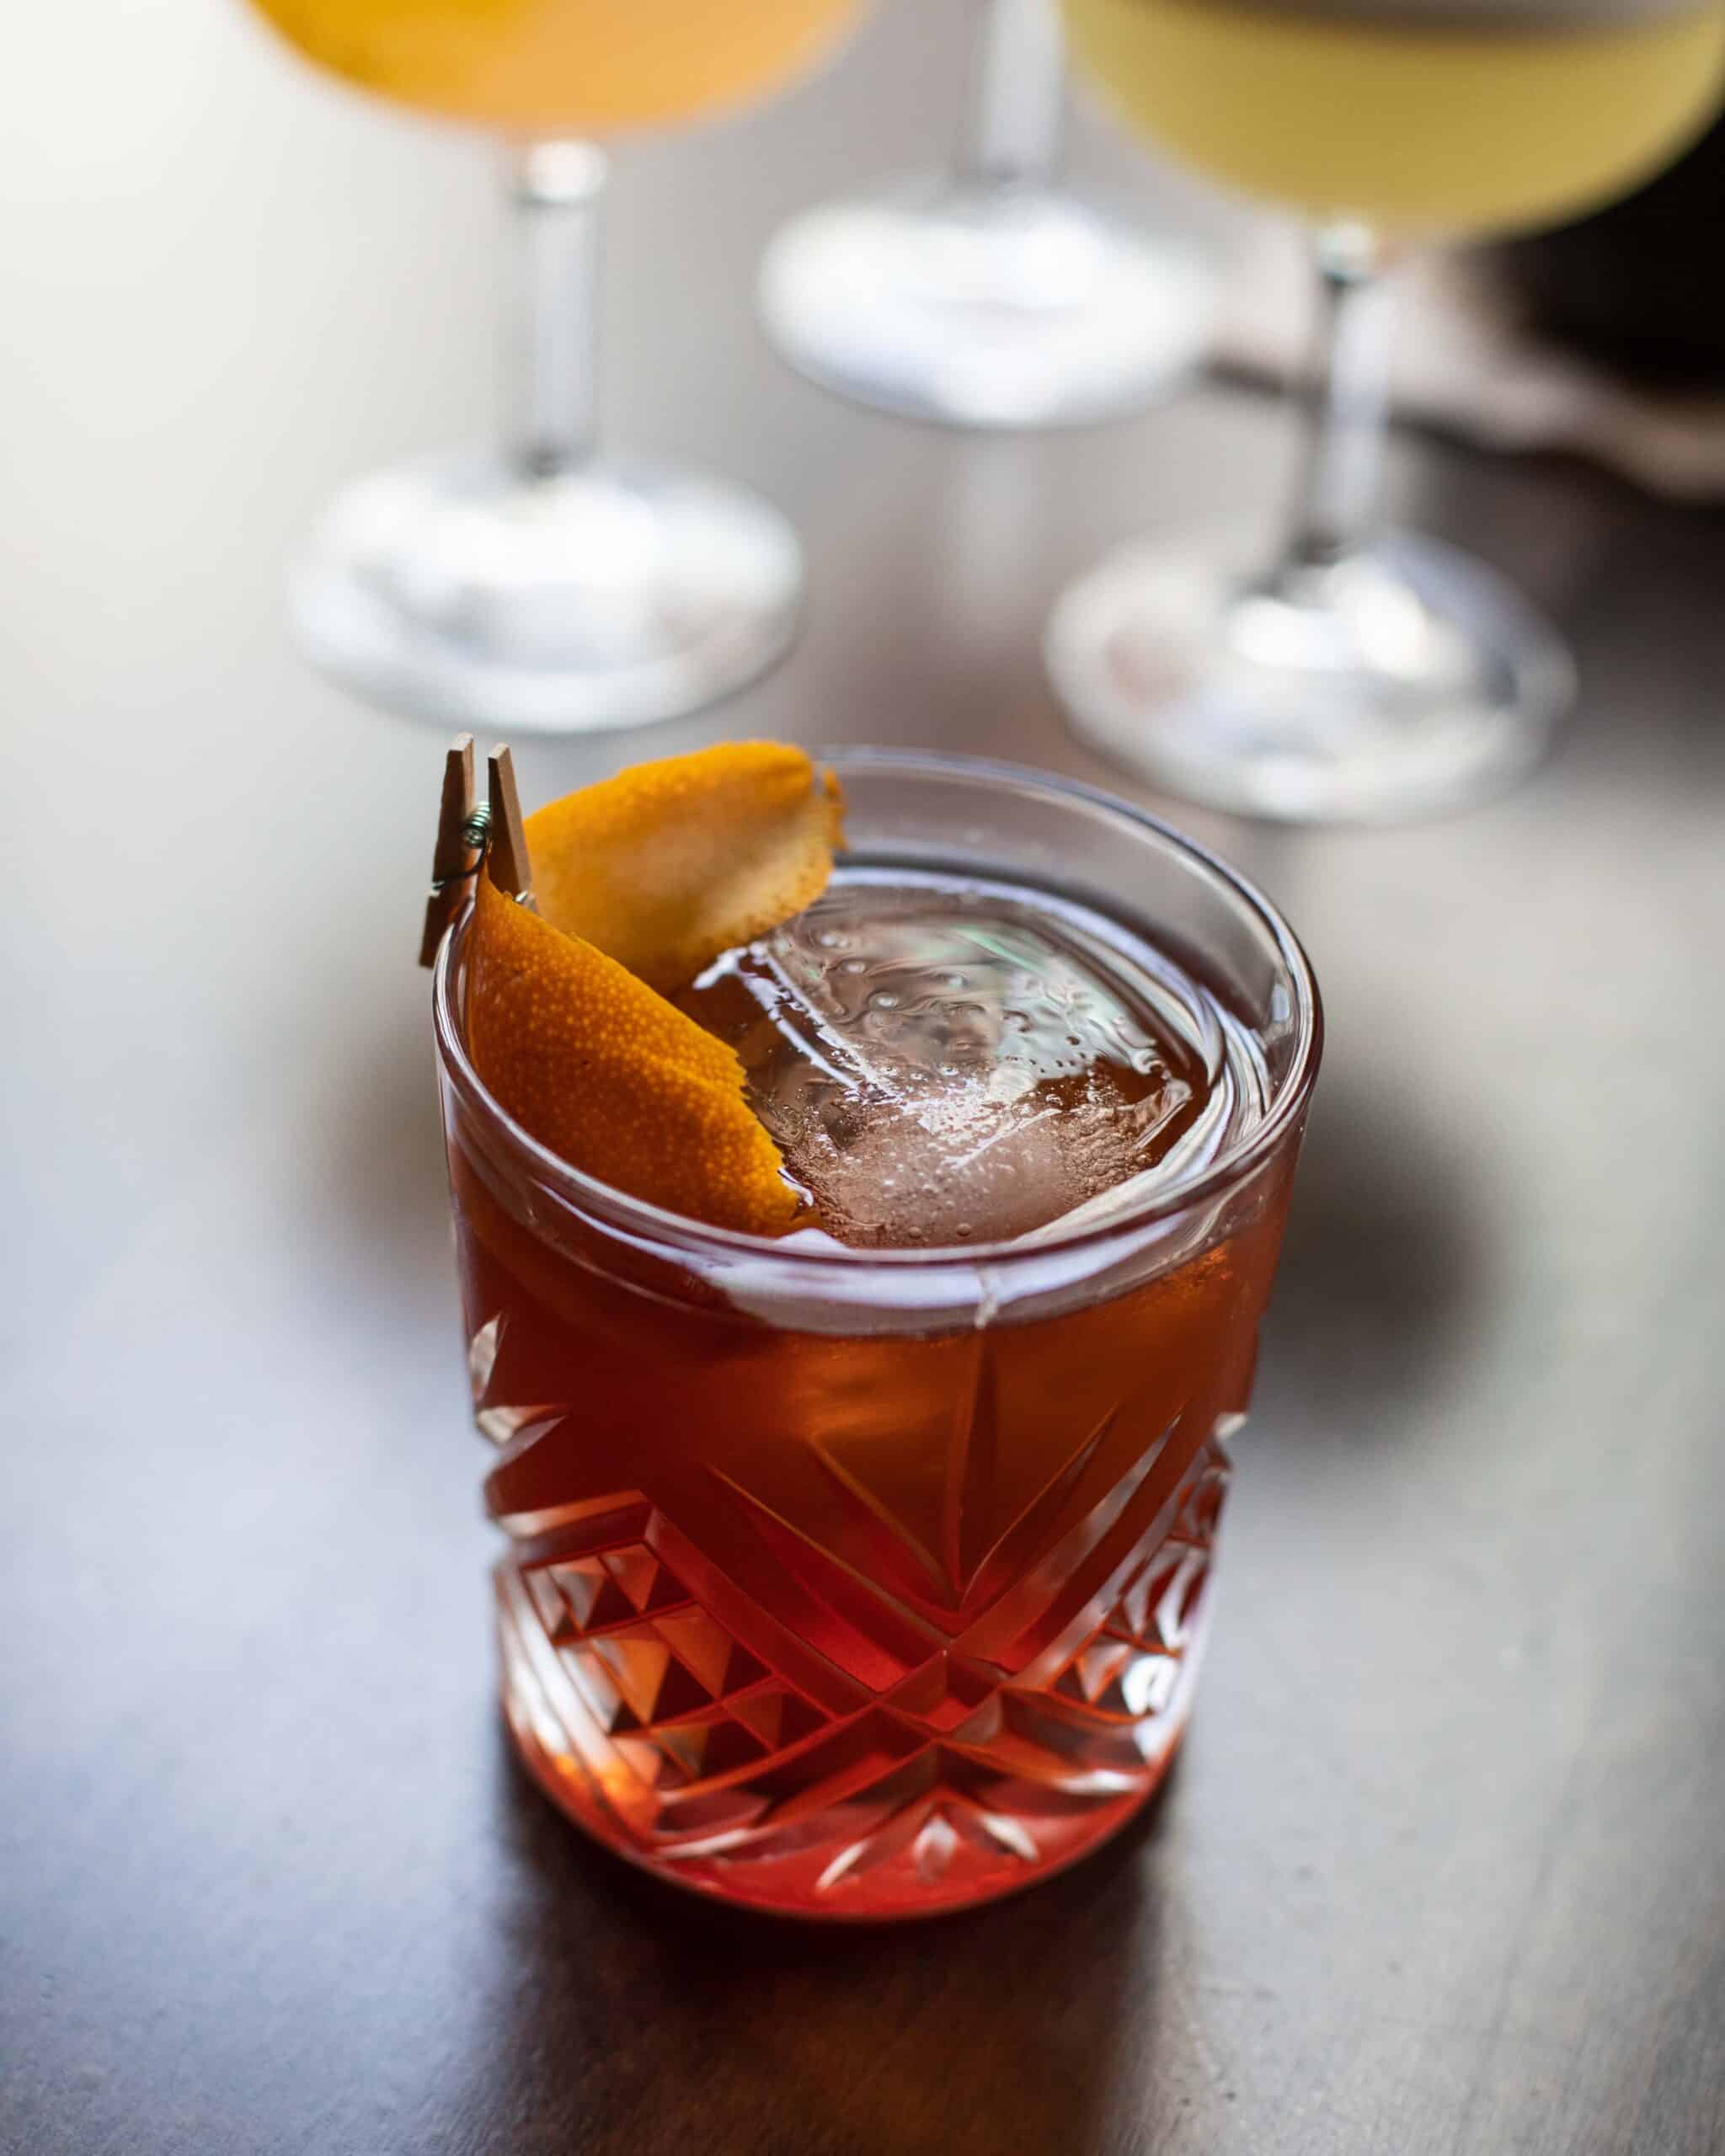 Bar Boss™ Bourbon's affinity for charred oak and smoke is an idyllic pair with Mulassano Rosso and brandied cherries. Smoked tableside